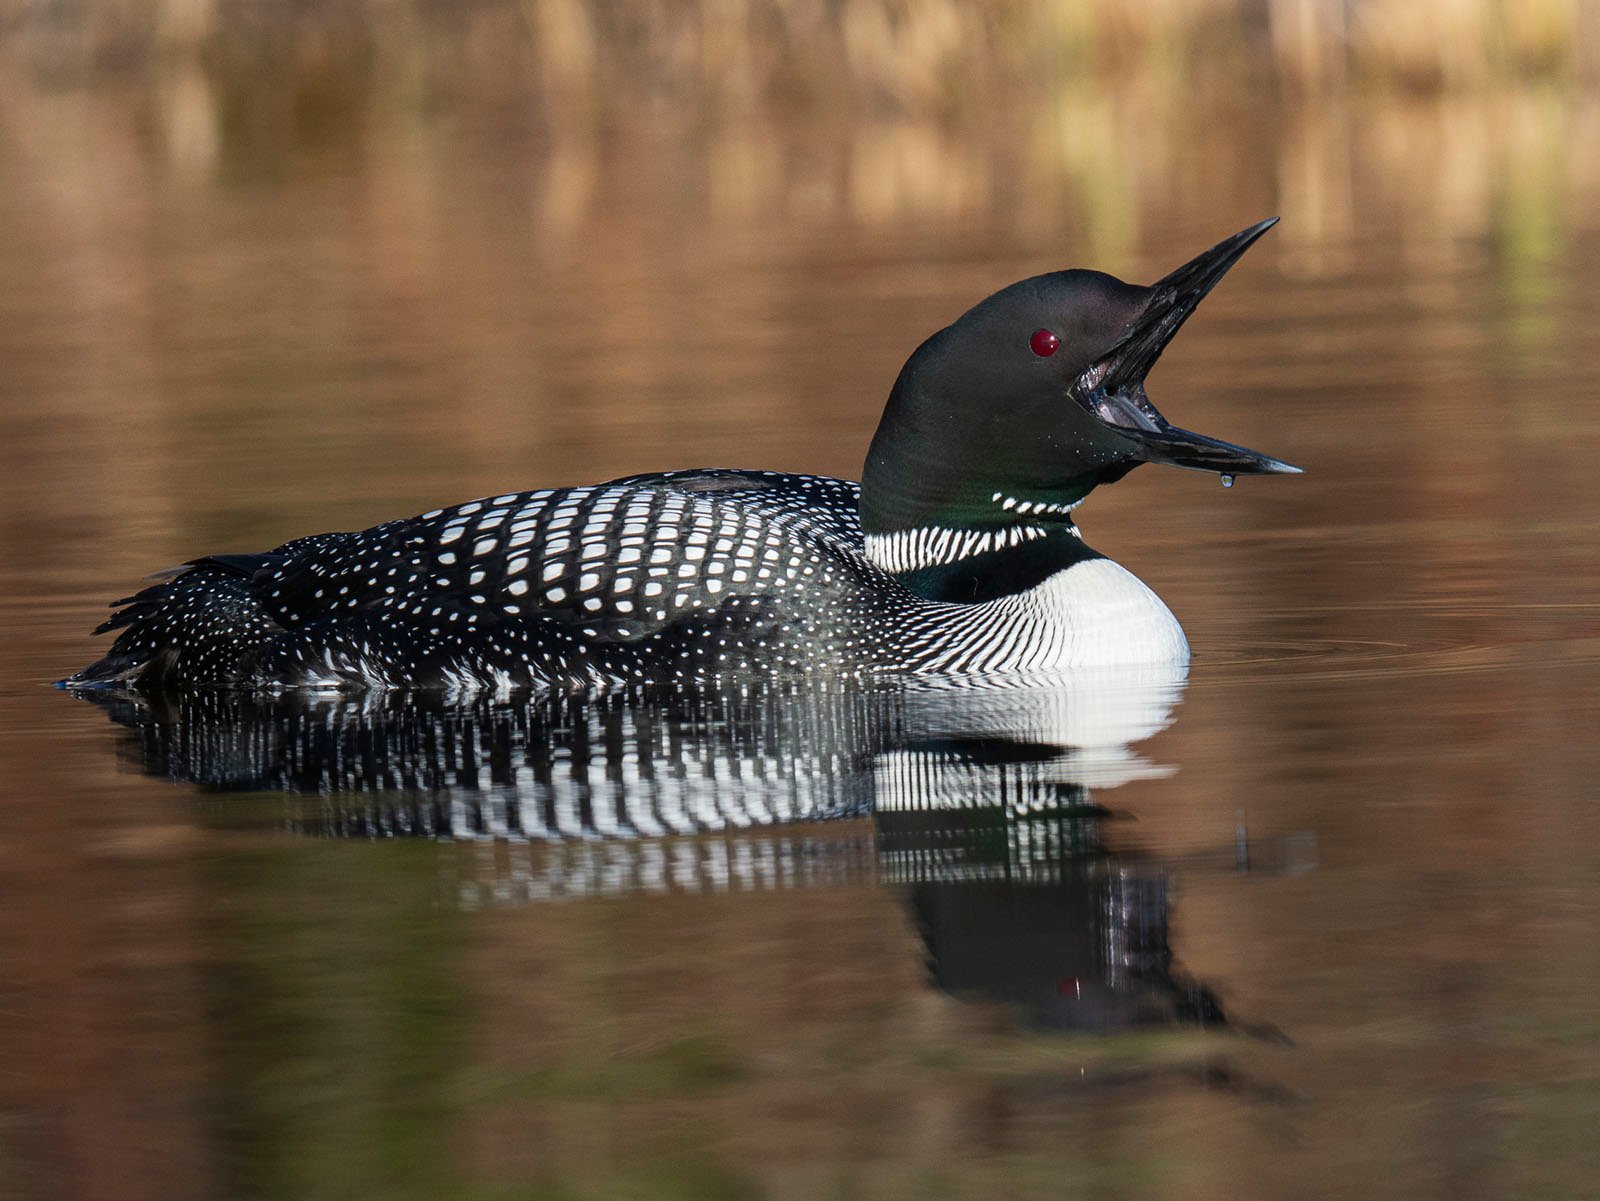 A common loon with striking black and white plumage and a red eye swims on a calm, reflective lake with soft, blurred reeds in the background.